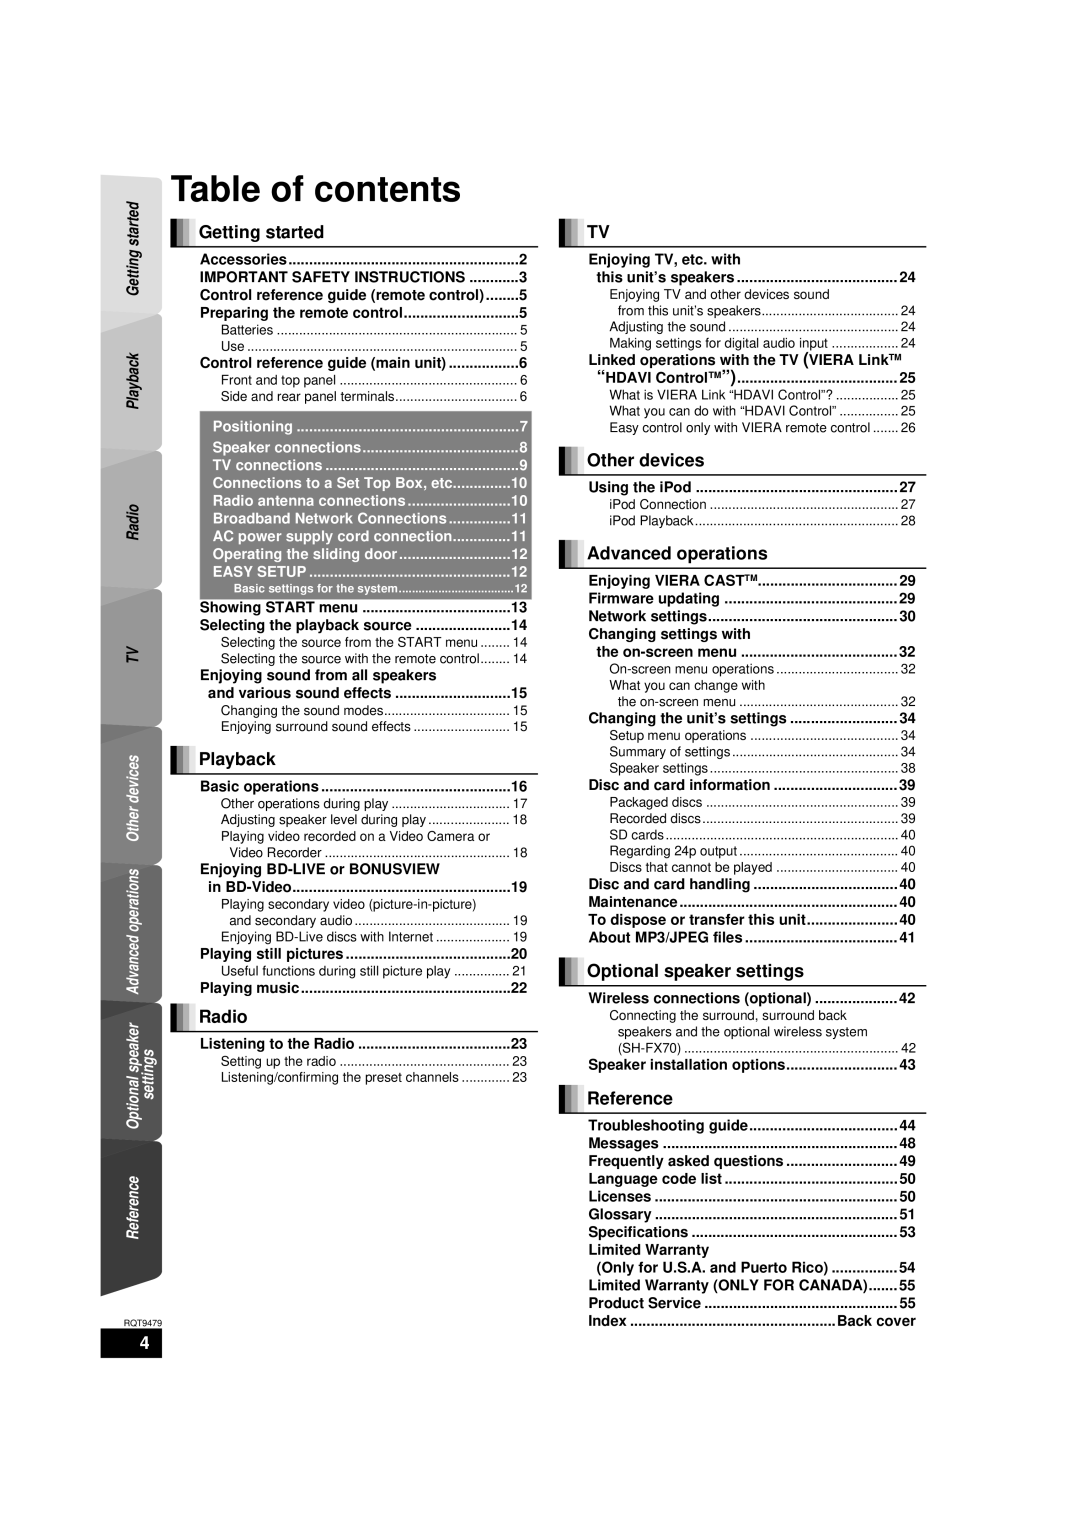 Panasonic SA-BTX70 Table of contents, Getting started, Playback, Radio, Other devices, Advanced operations, Reference 